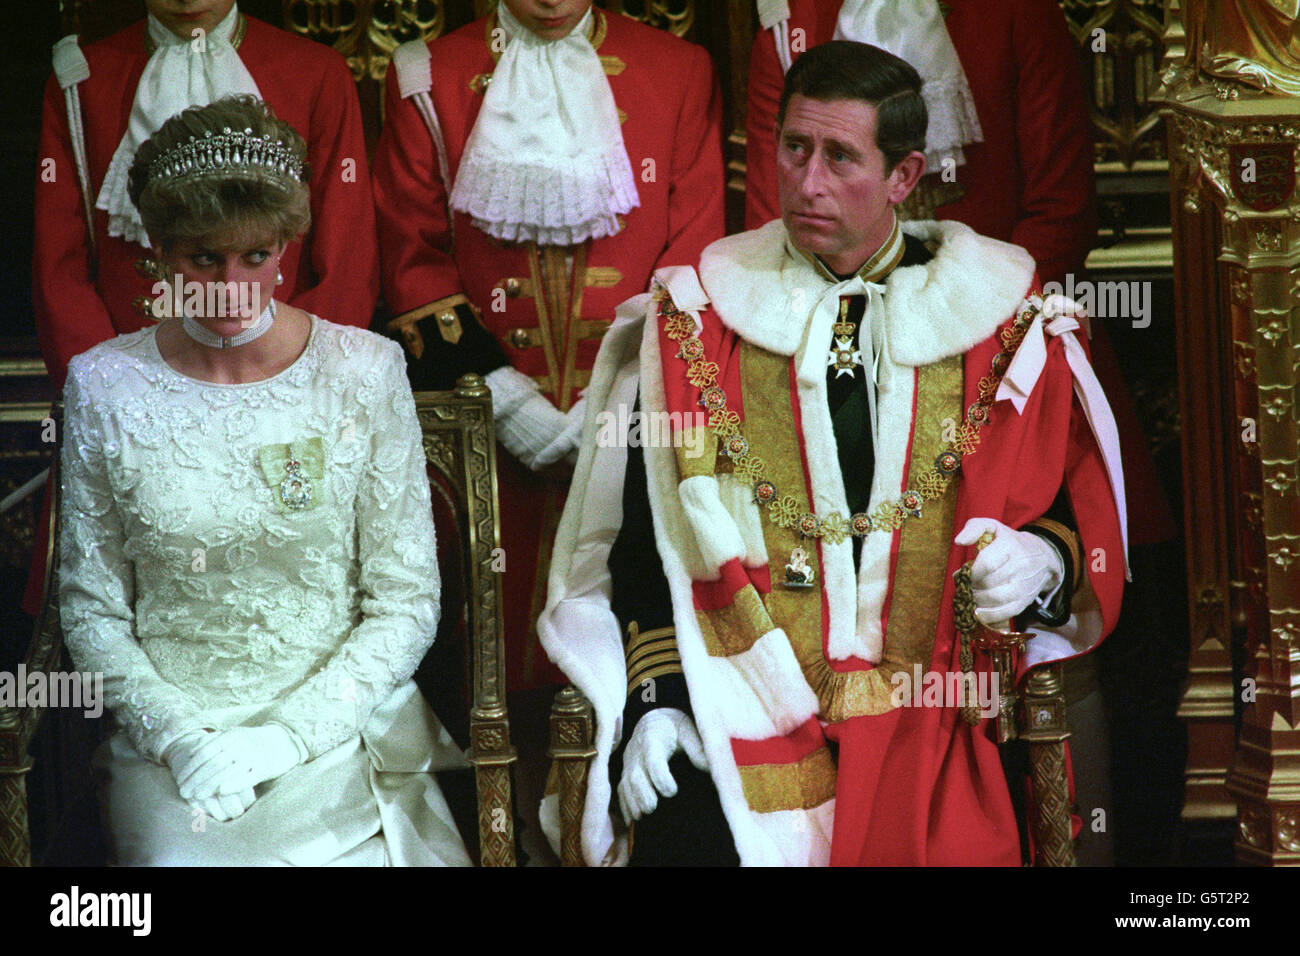 The Prince and Princess of Wales attend the State opening of Parliament. *DECEMBER 9th 1992: On this day in 1992 Prince Charles and Princess Diana announced their separation. Stock Photo